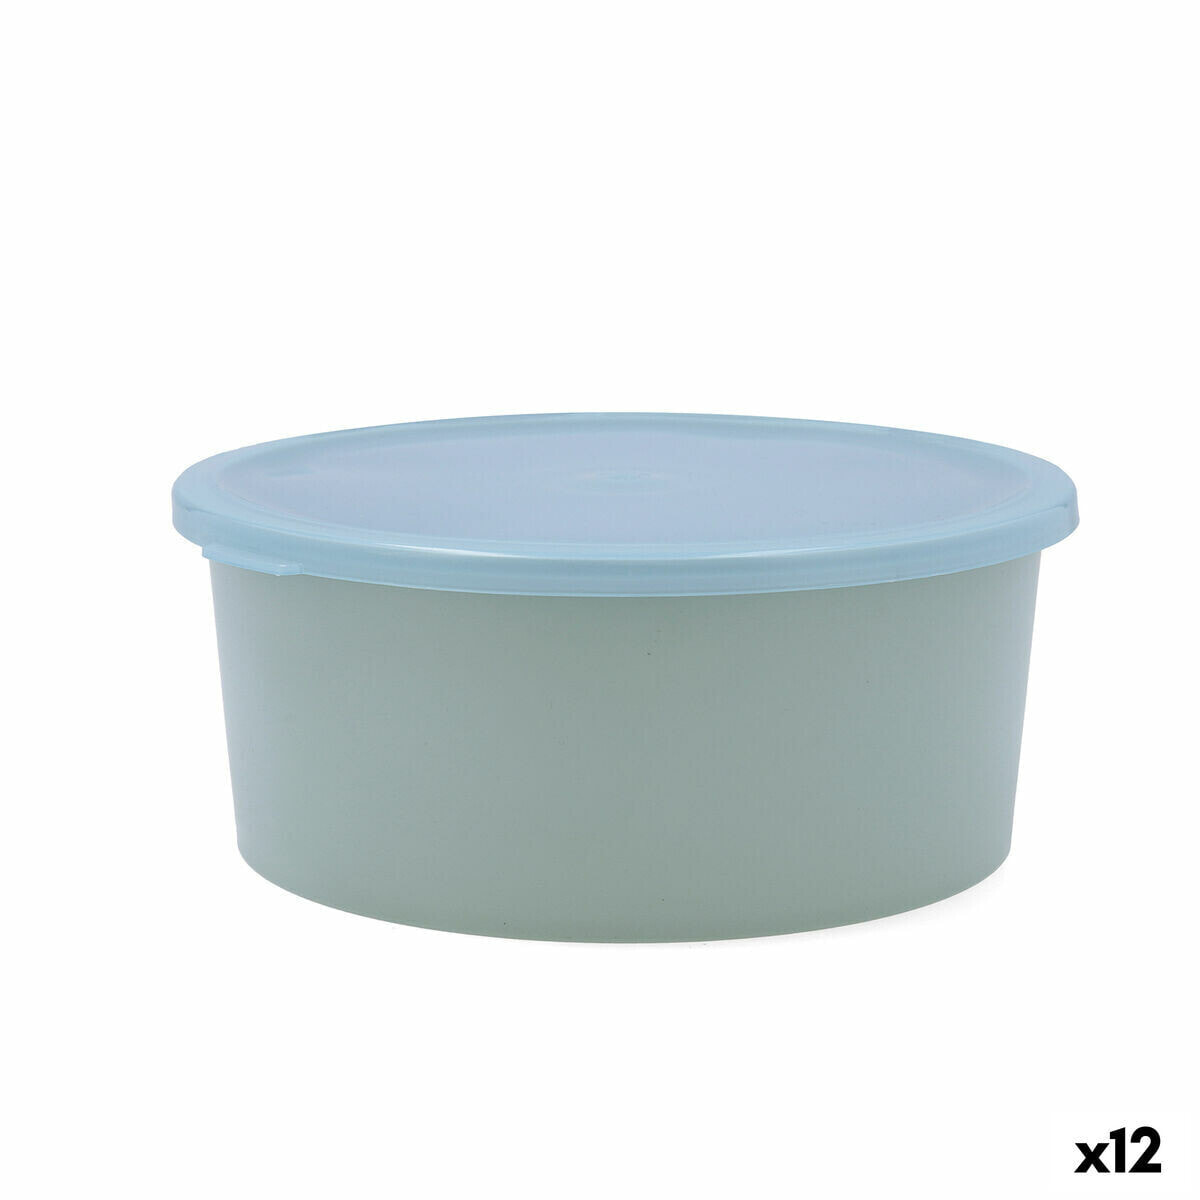 Round Lunch Box with Lid Quid Inspira 1,34 L Green Plastic (12 Units)